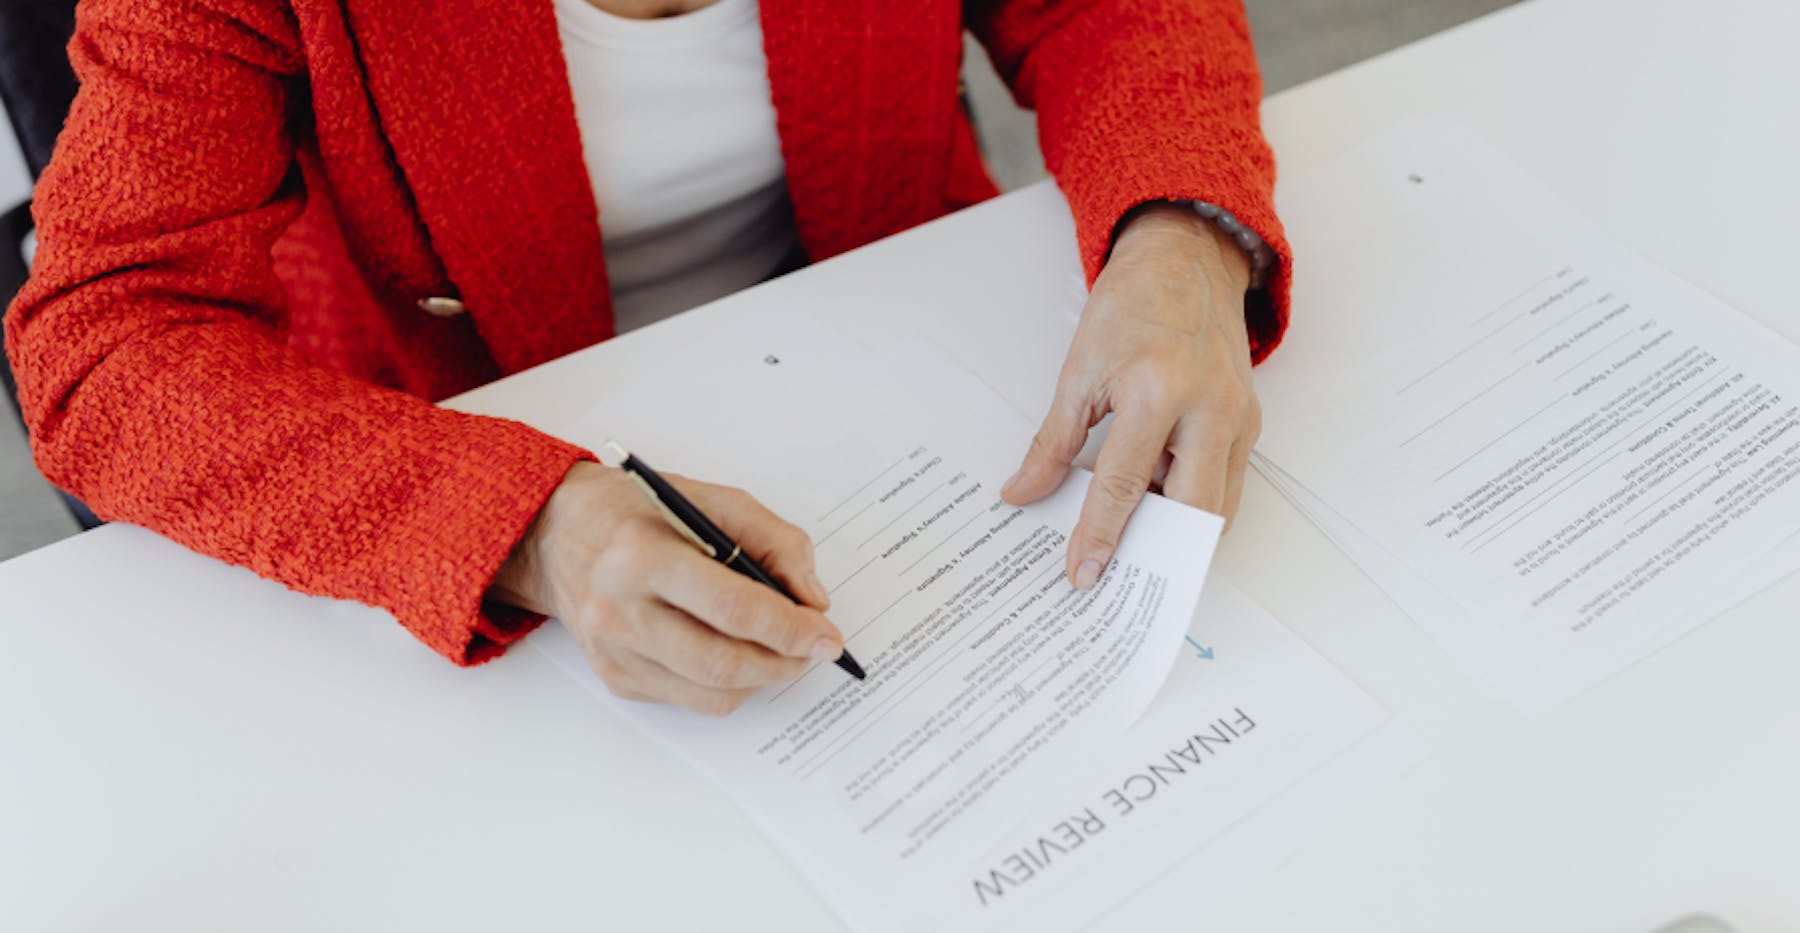 woman signing papers in red sweater